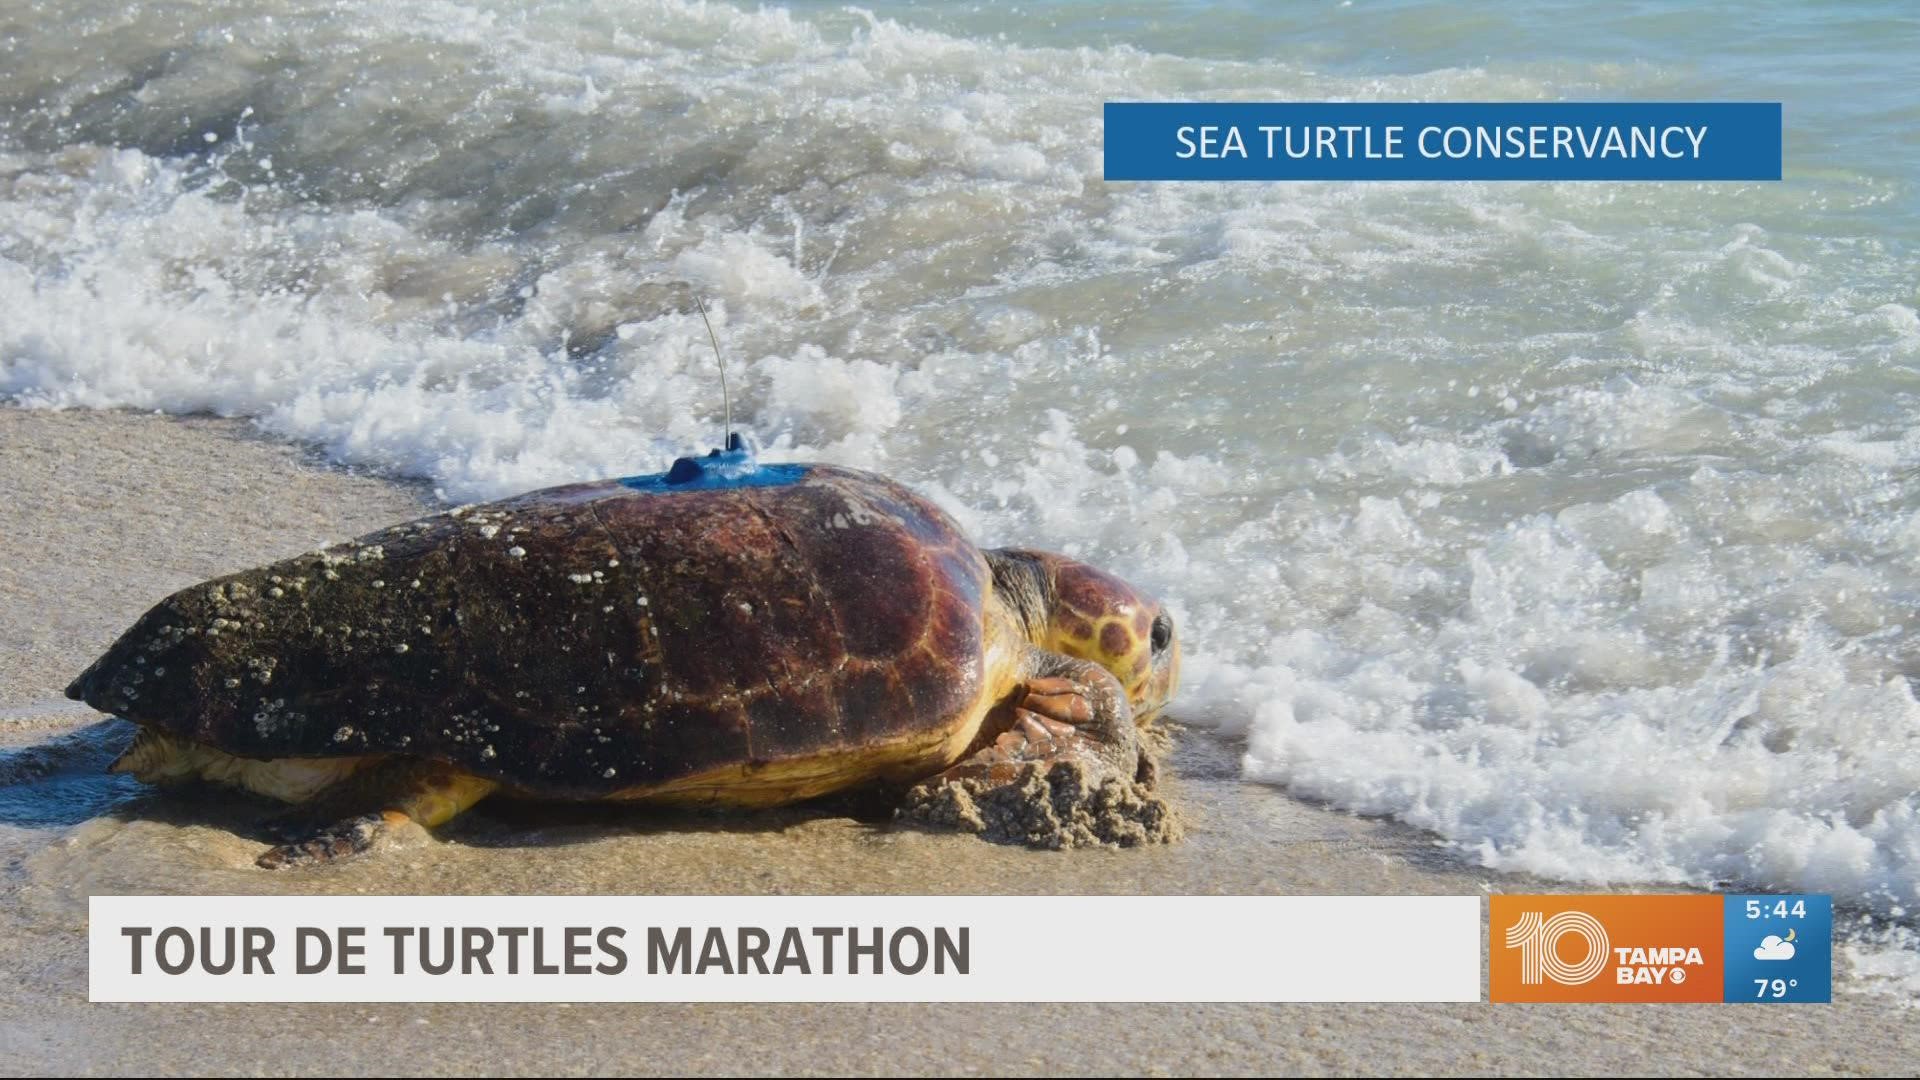 'Tour de Turtles' is a sea turtle-tracking program that records the migration of turtles released from Costa Rica, Panama, Nevis and Florida.